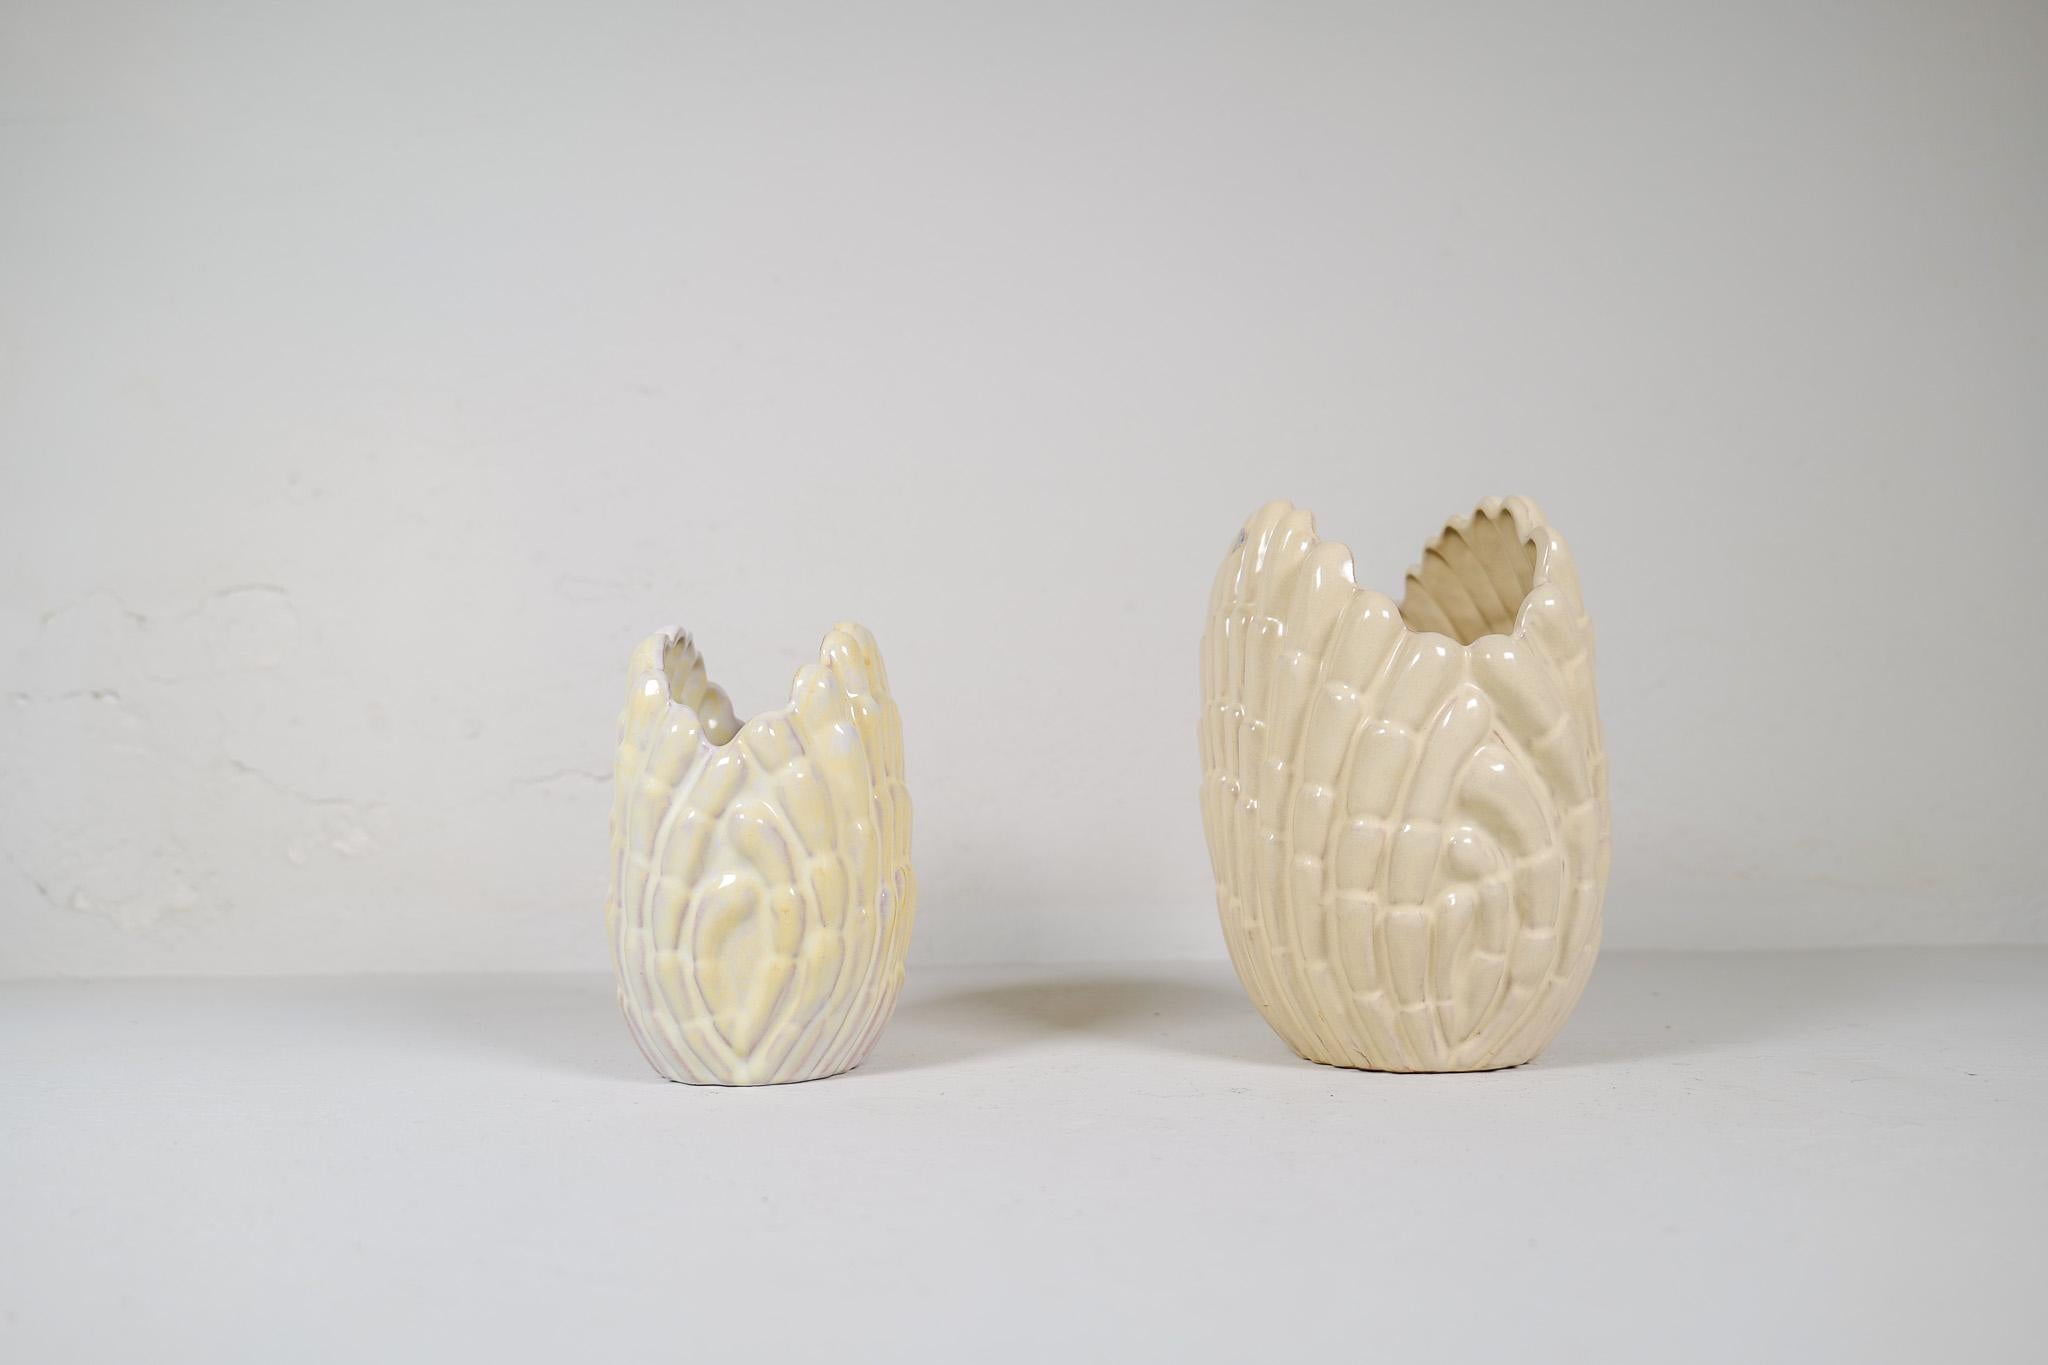 Midcentury Modern Pair of Seashell Vases by Vicke Lindstrand , Sweden In Good Condition For Sale In Hillringsberg, SE